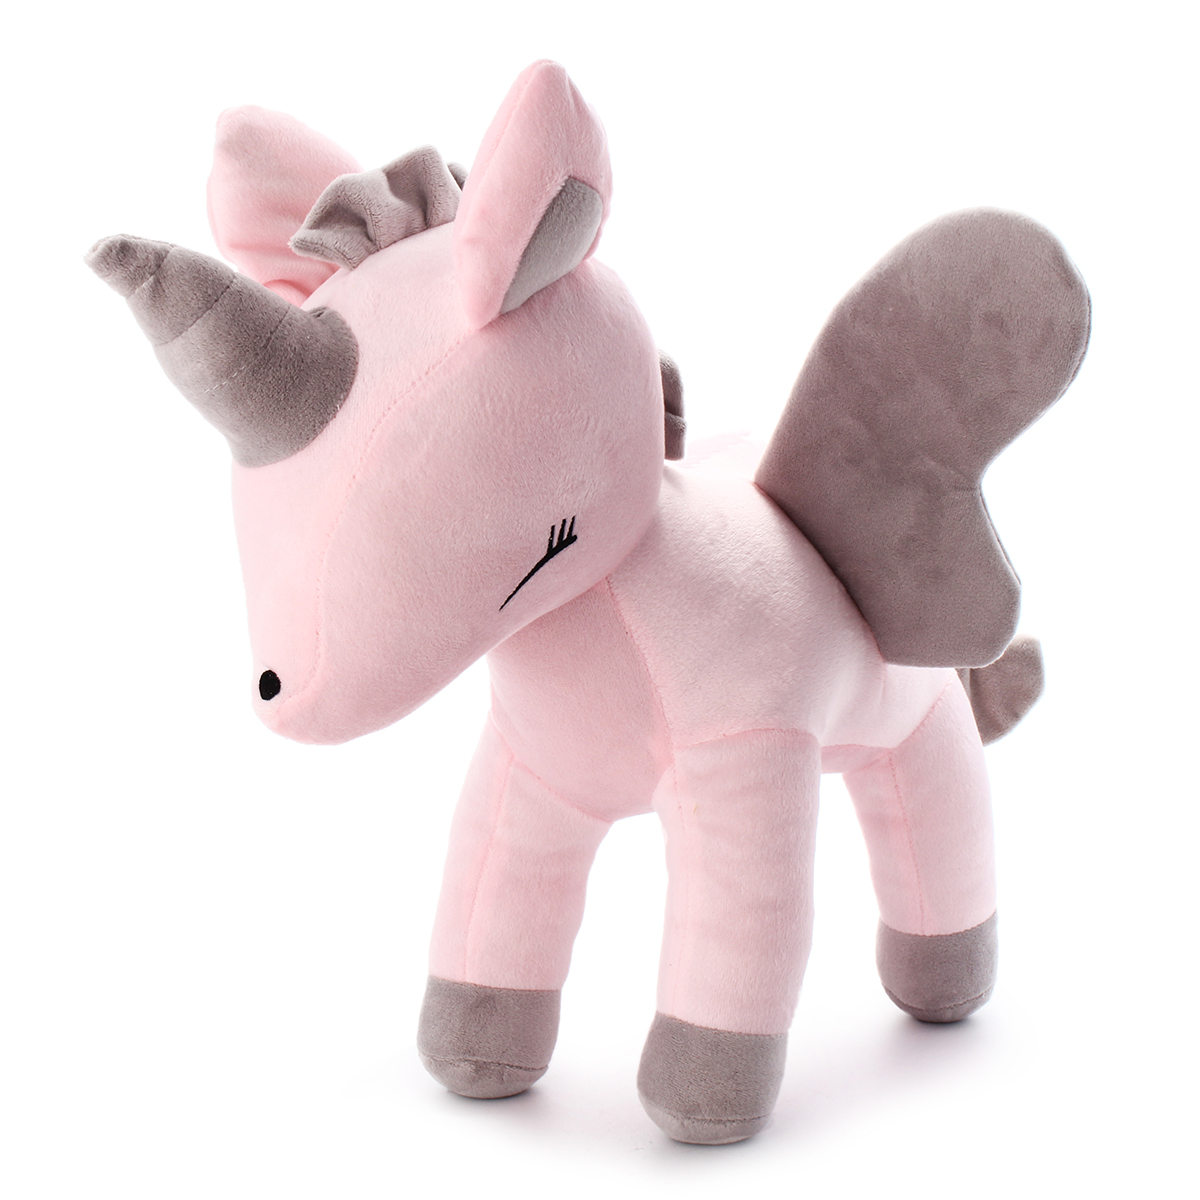 16-Inches-Soft-Giant-Unicorn-Stuffed-Plush-Toy-Animal-Doll-Children-Gifts-Photo-Props-Gift-1299365-2